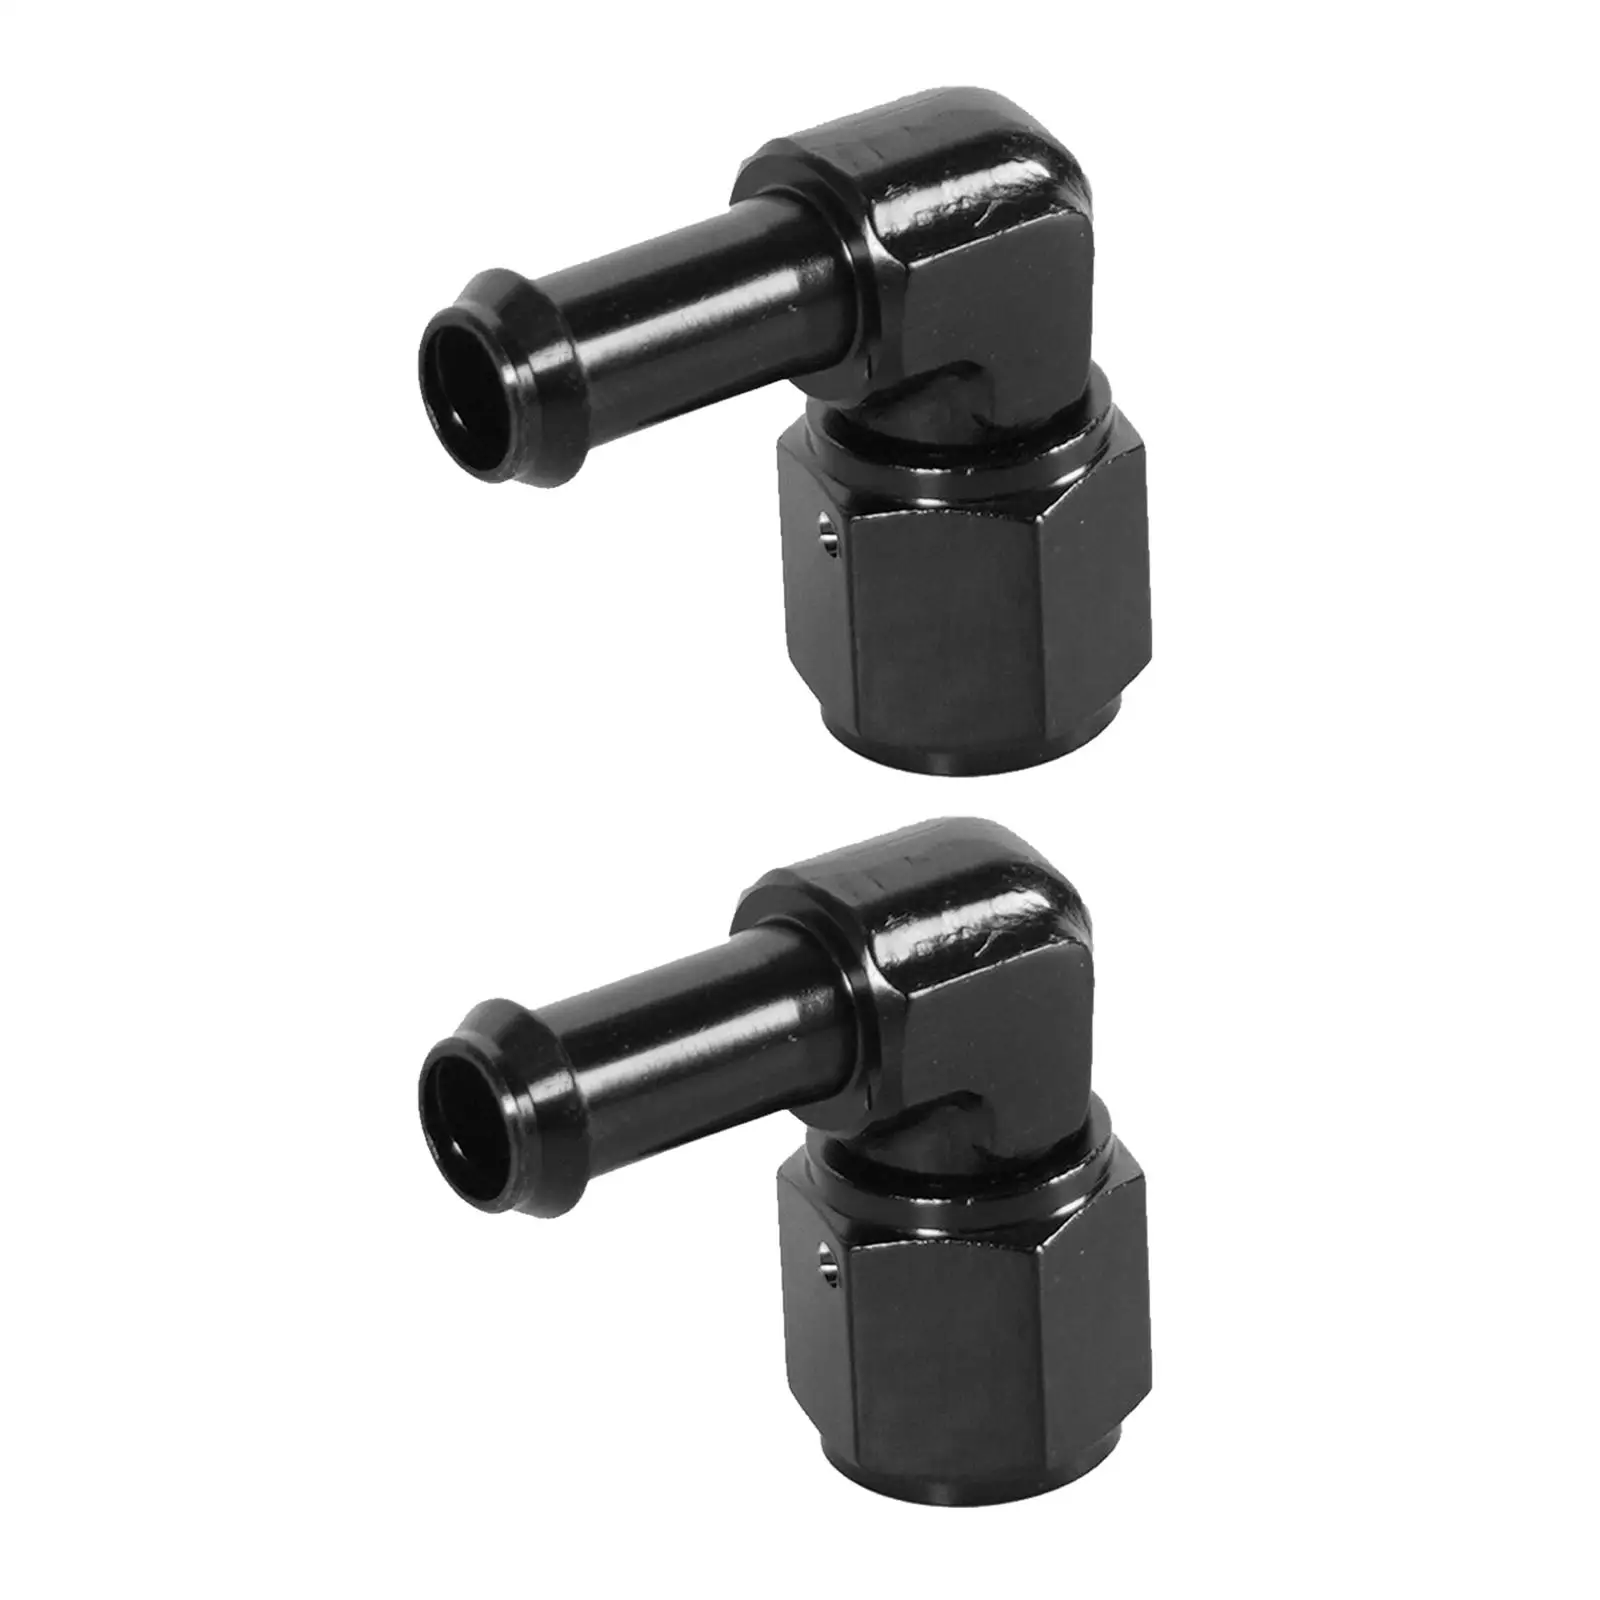 

Female AN -6 Swivel Barb Fittings Adapter 90 Degree Quick Connect Aluminum Elbow Adapter Swivel Hose Fitting Black Anodized